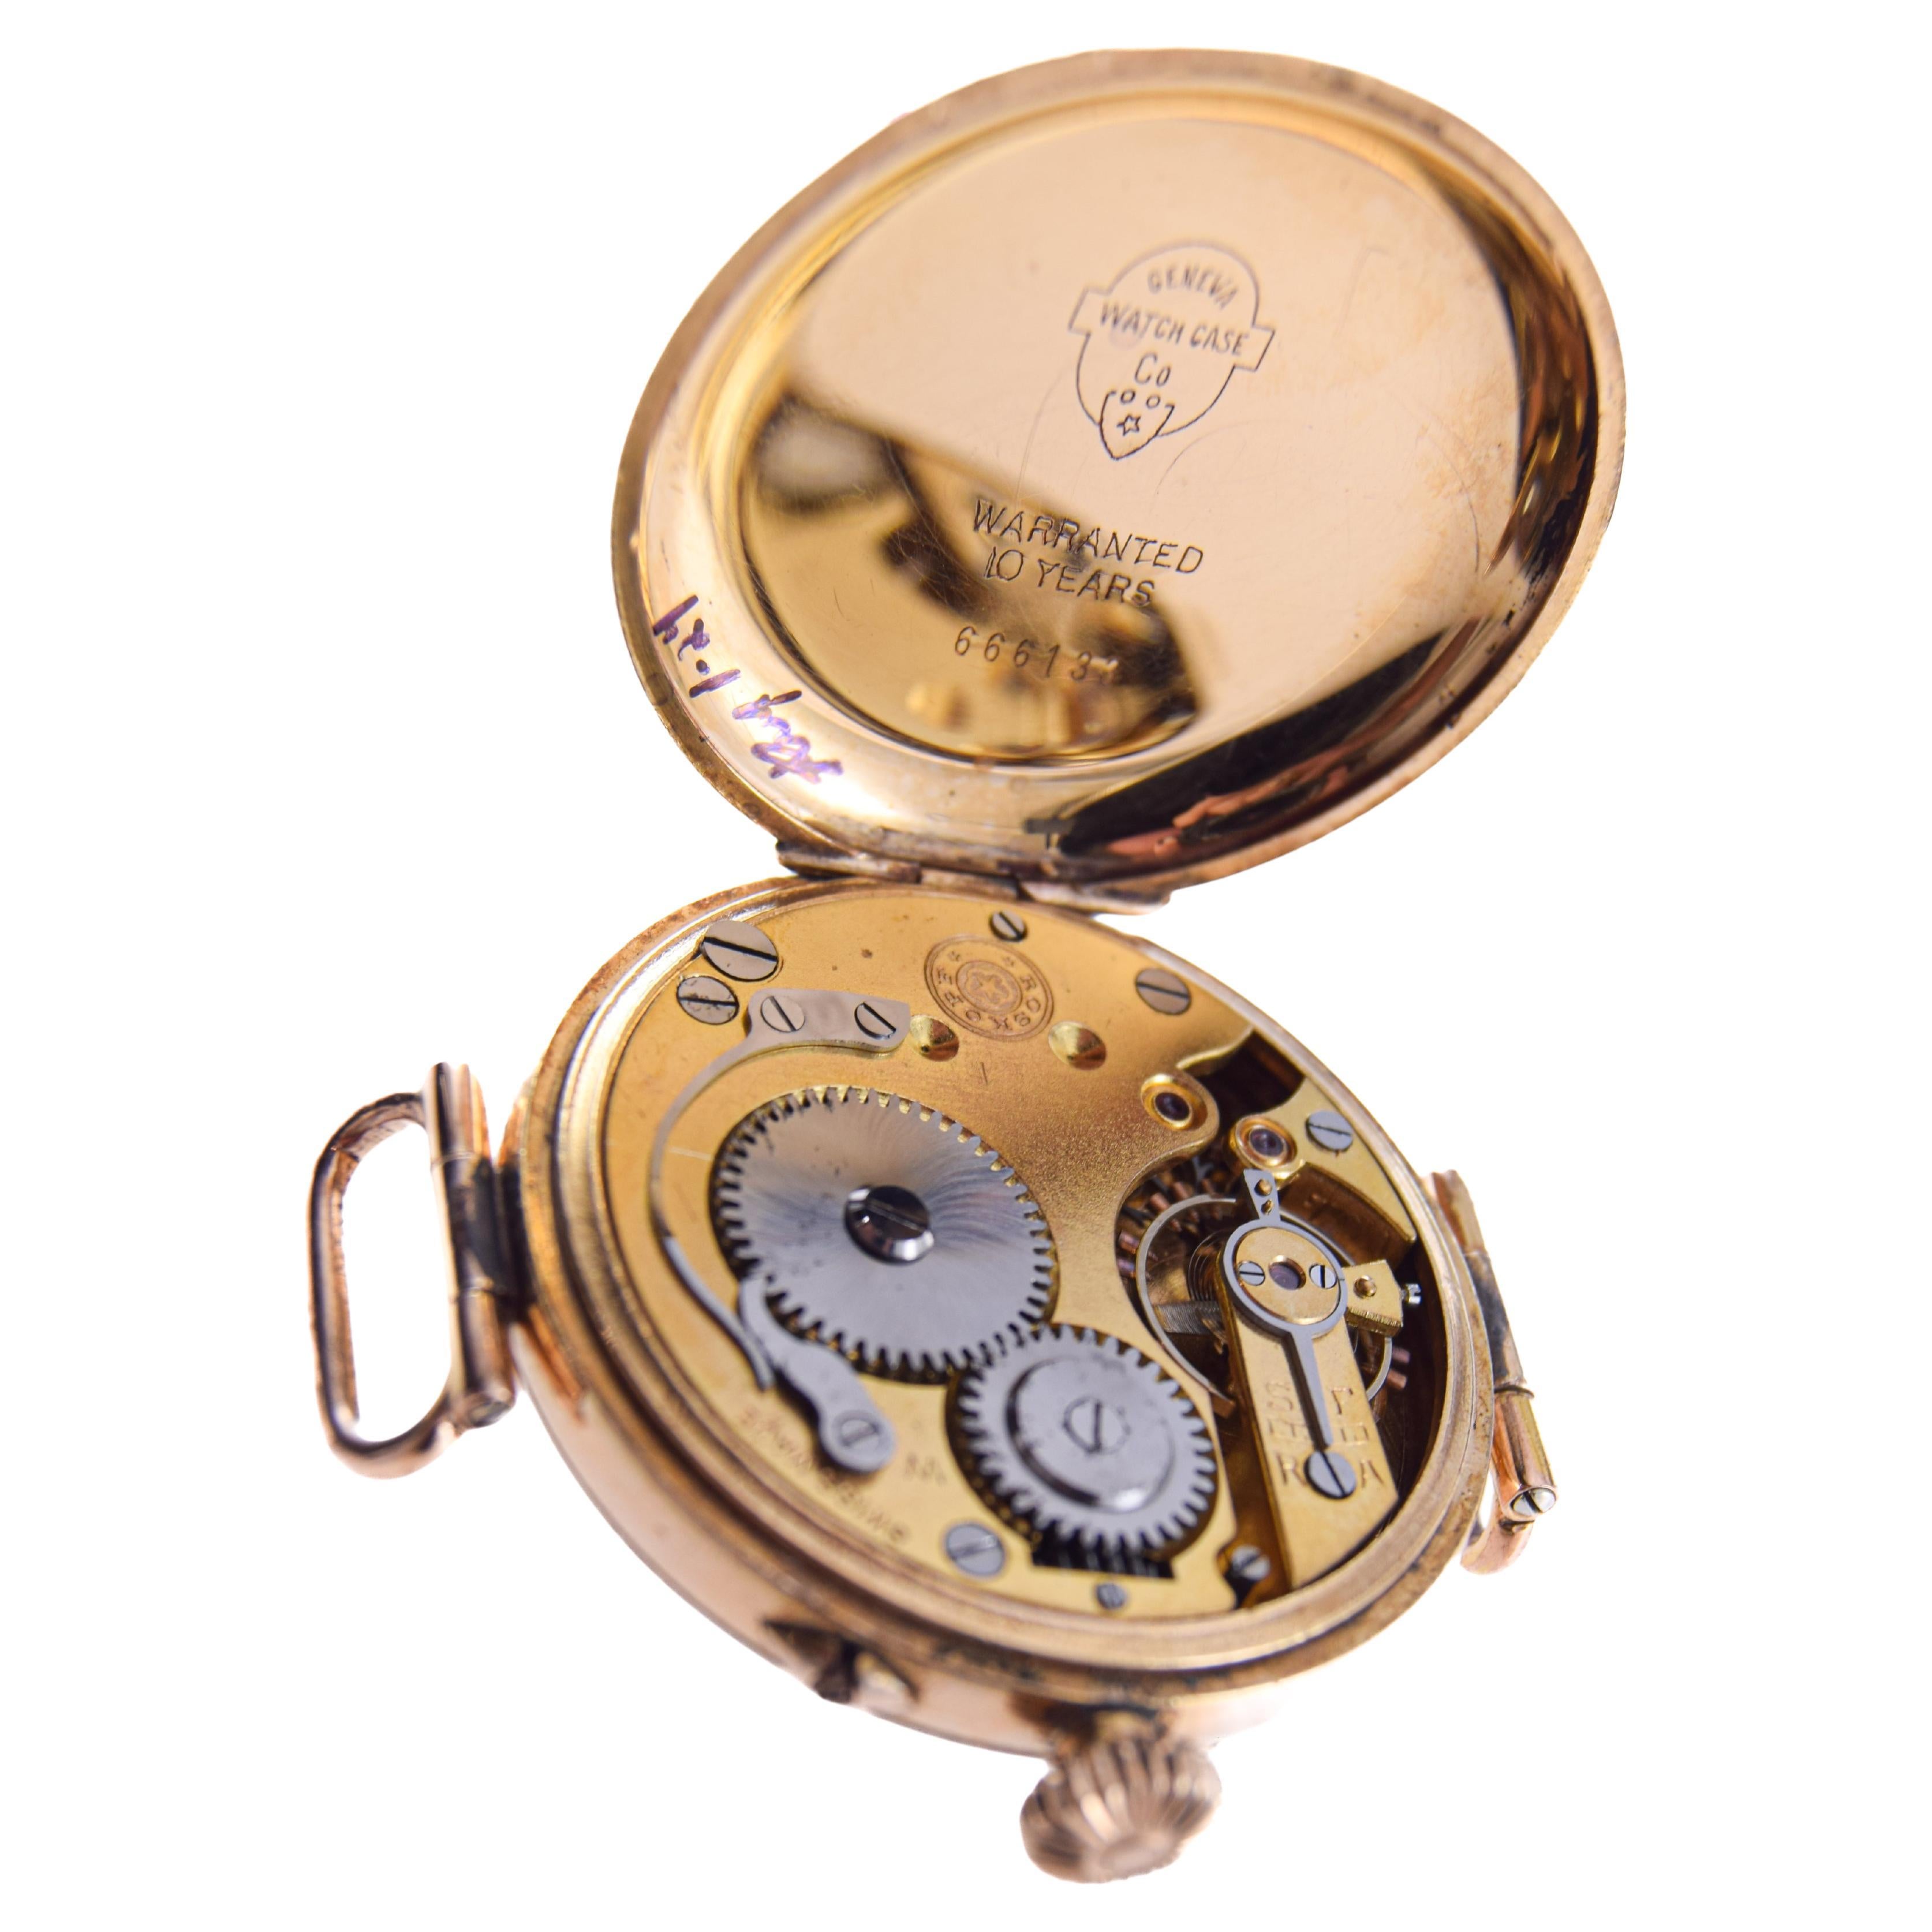 Roskopf Gold-Filled Campaign Style with Original Flawless Enamel Dial Circa 1910 For Sale 8